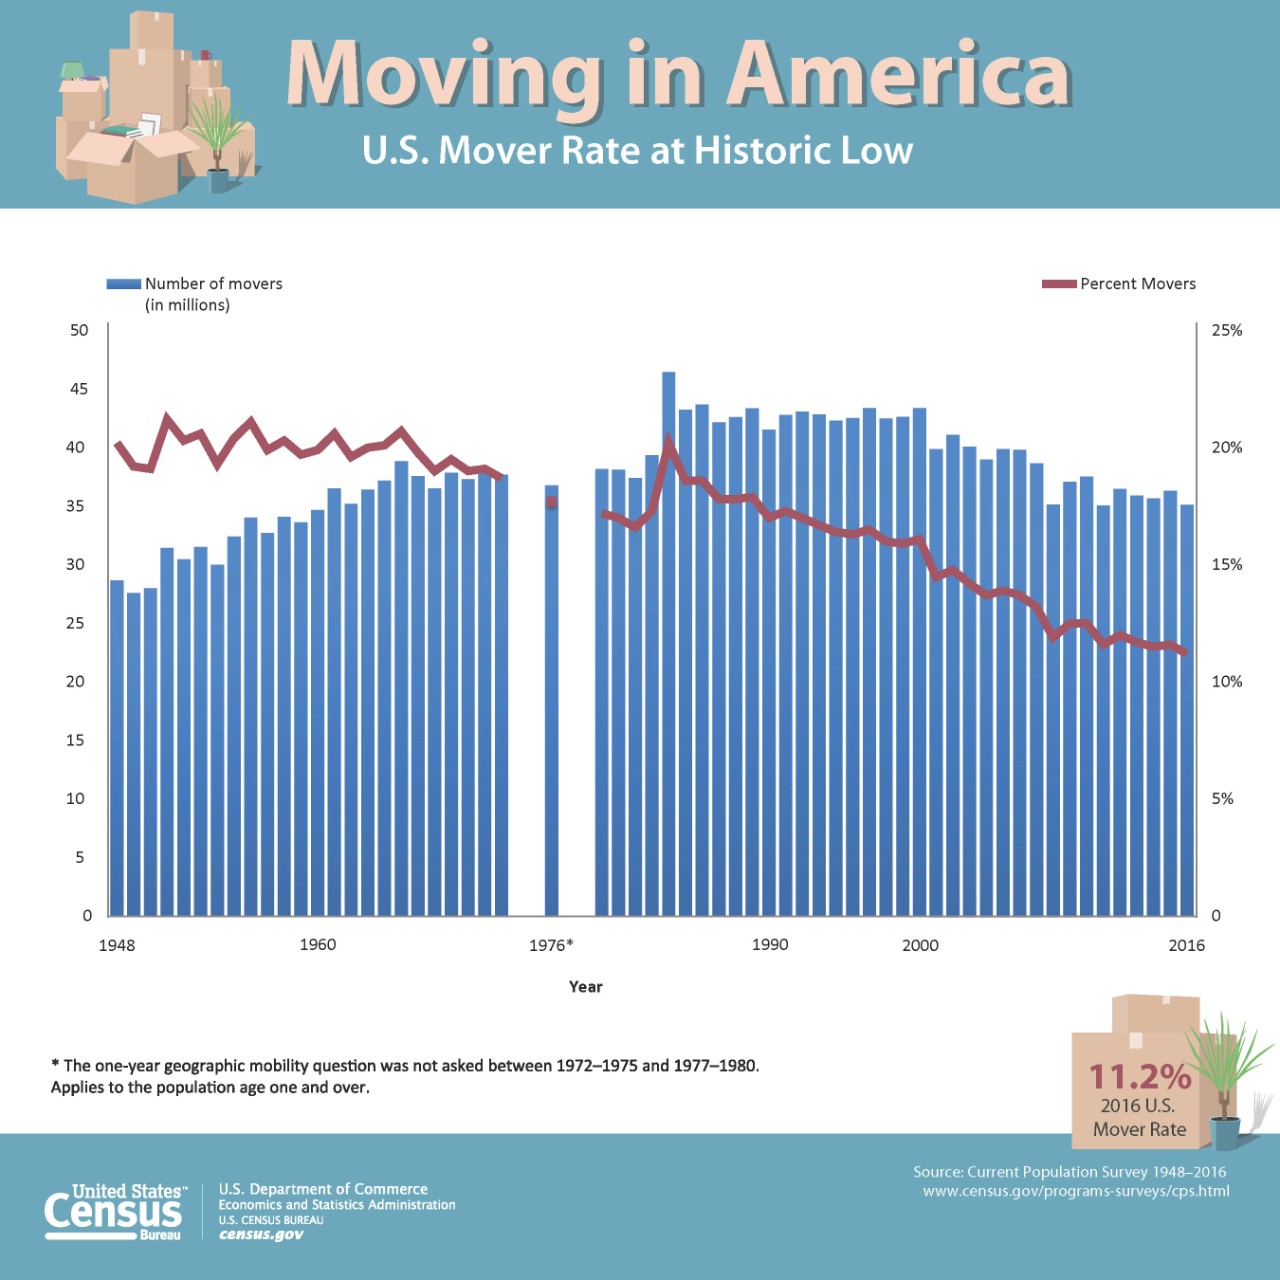 Moving in America